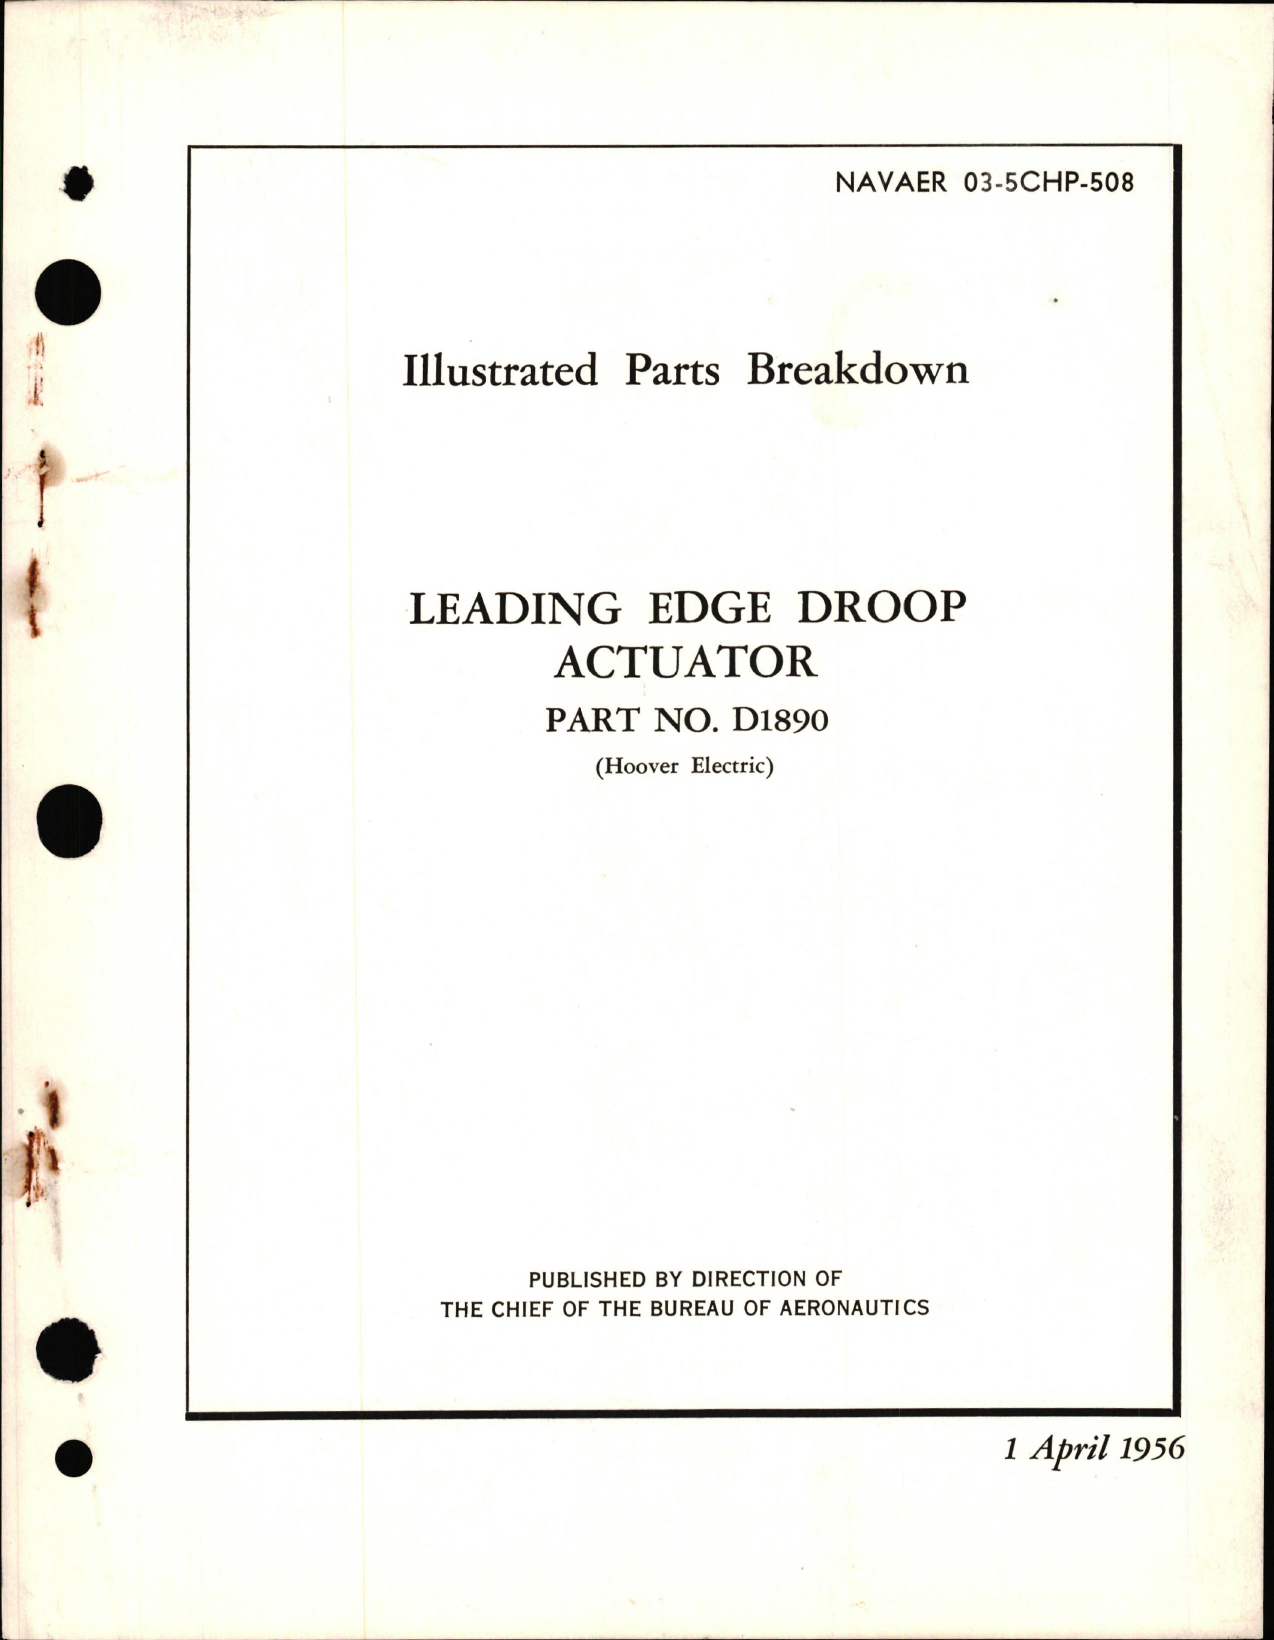 Sample page 1 from AirCorps Library document: Illustrated Parts Breakdown for Leading Edge Droop Actuator Part D1890